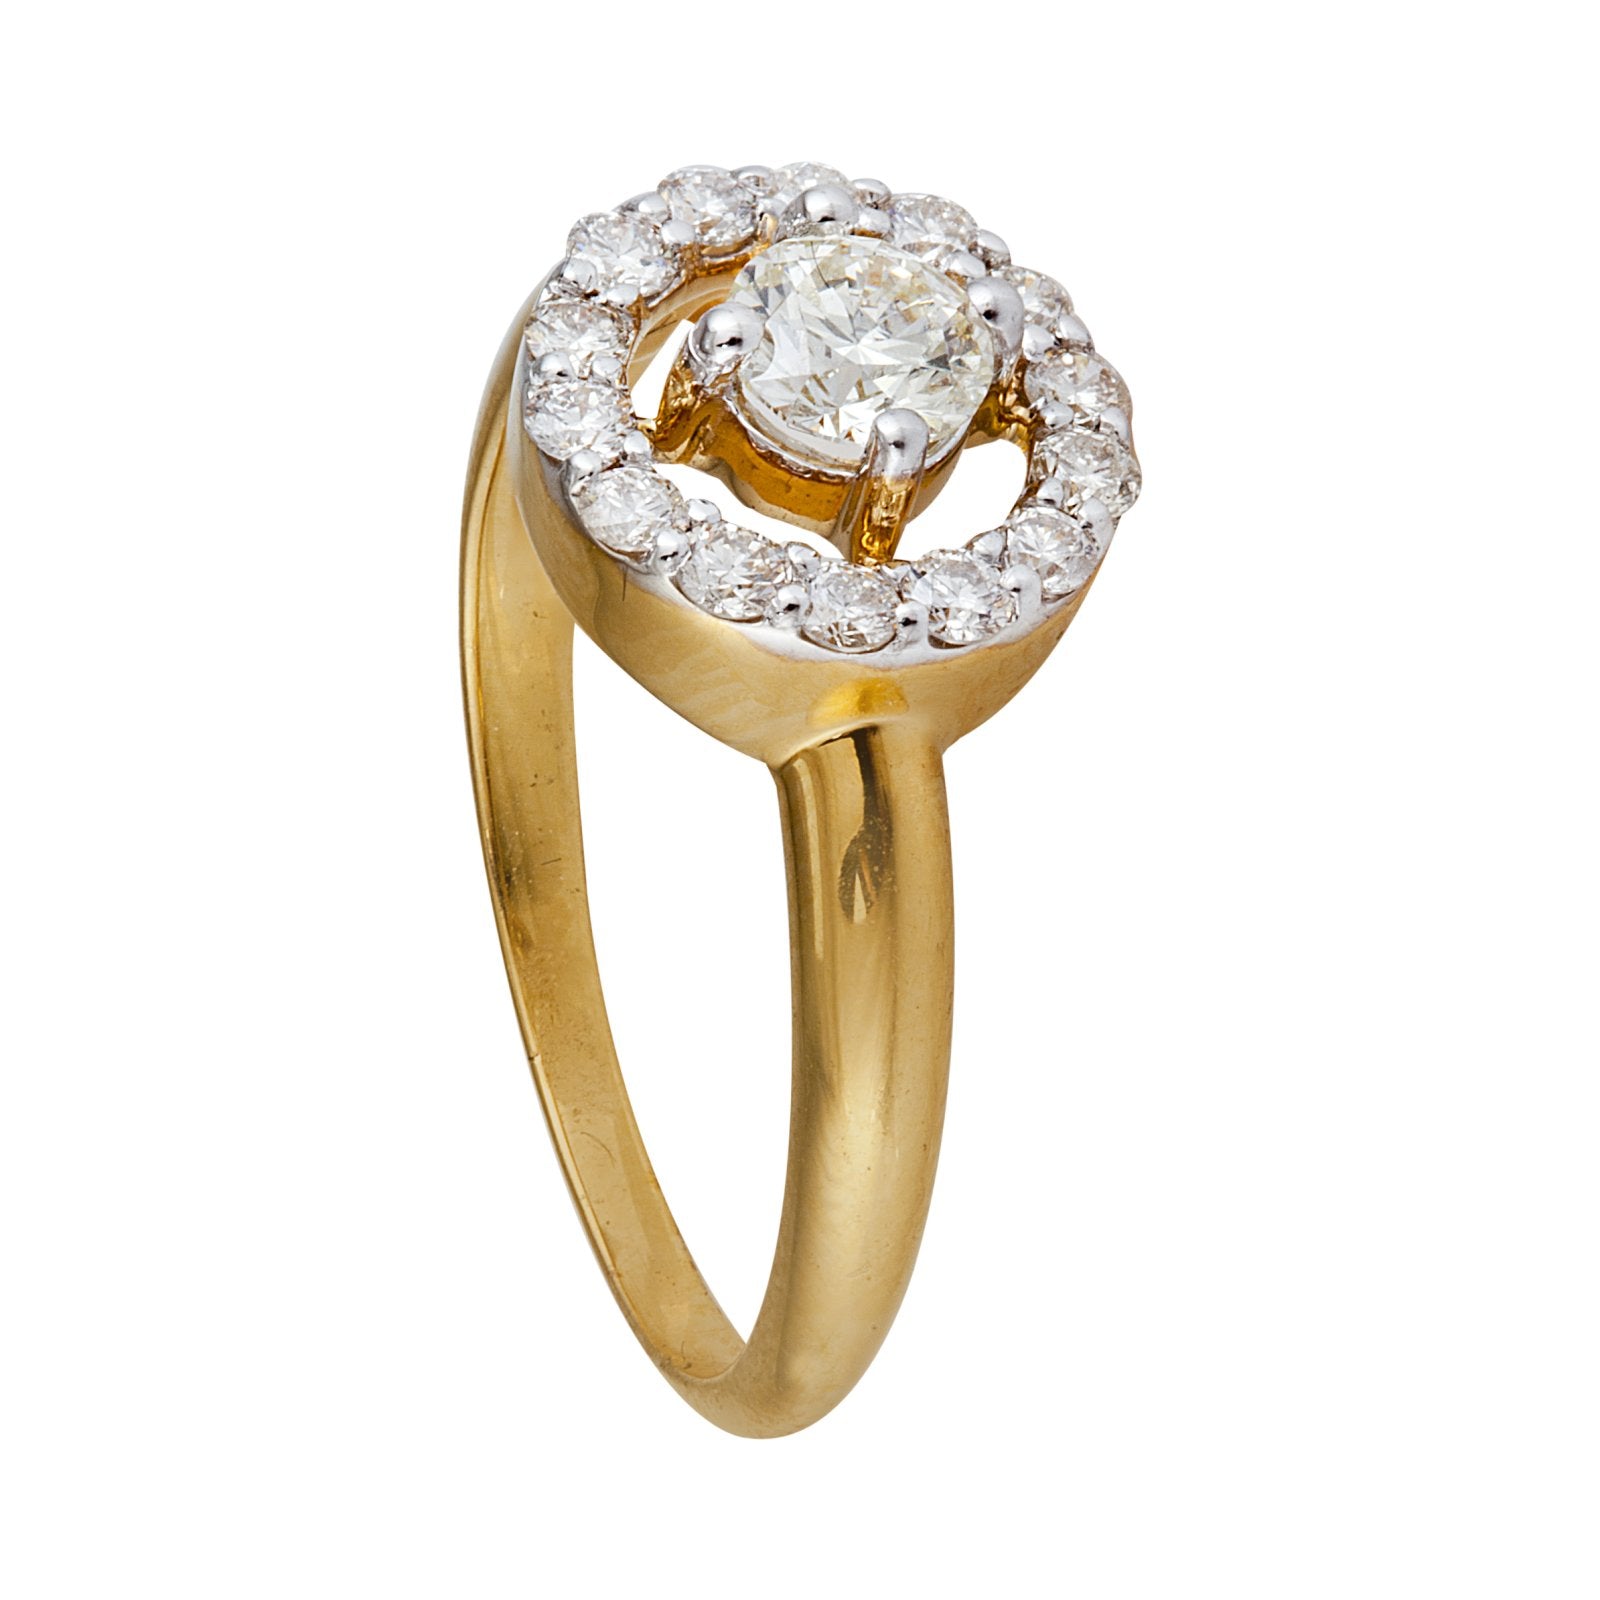 Yellow Gold Diamond Ring  setting with 14 Natural Round Diamonds in one circle and 0.3ct Single Diamonds in center TDW: 0.63ct VS HI 18k